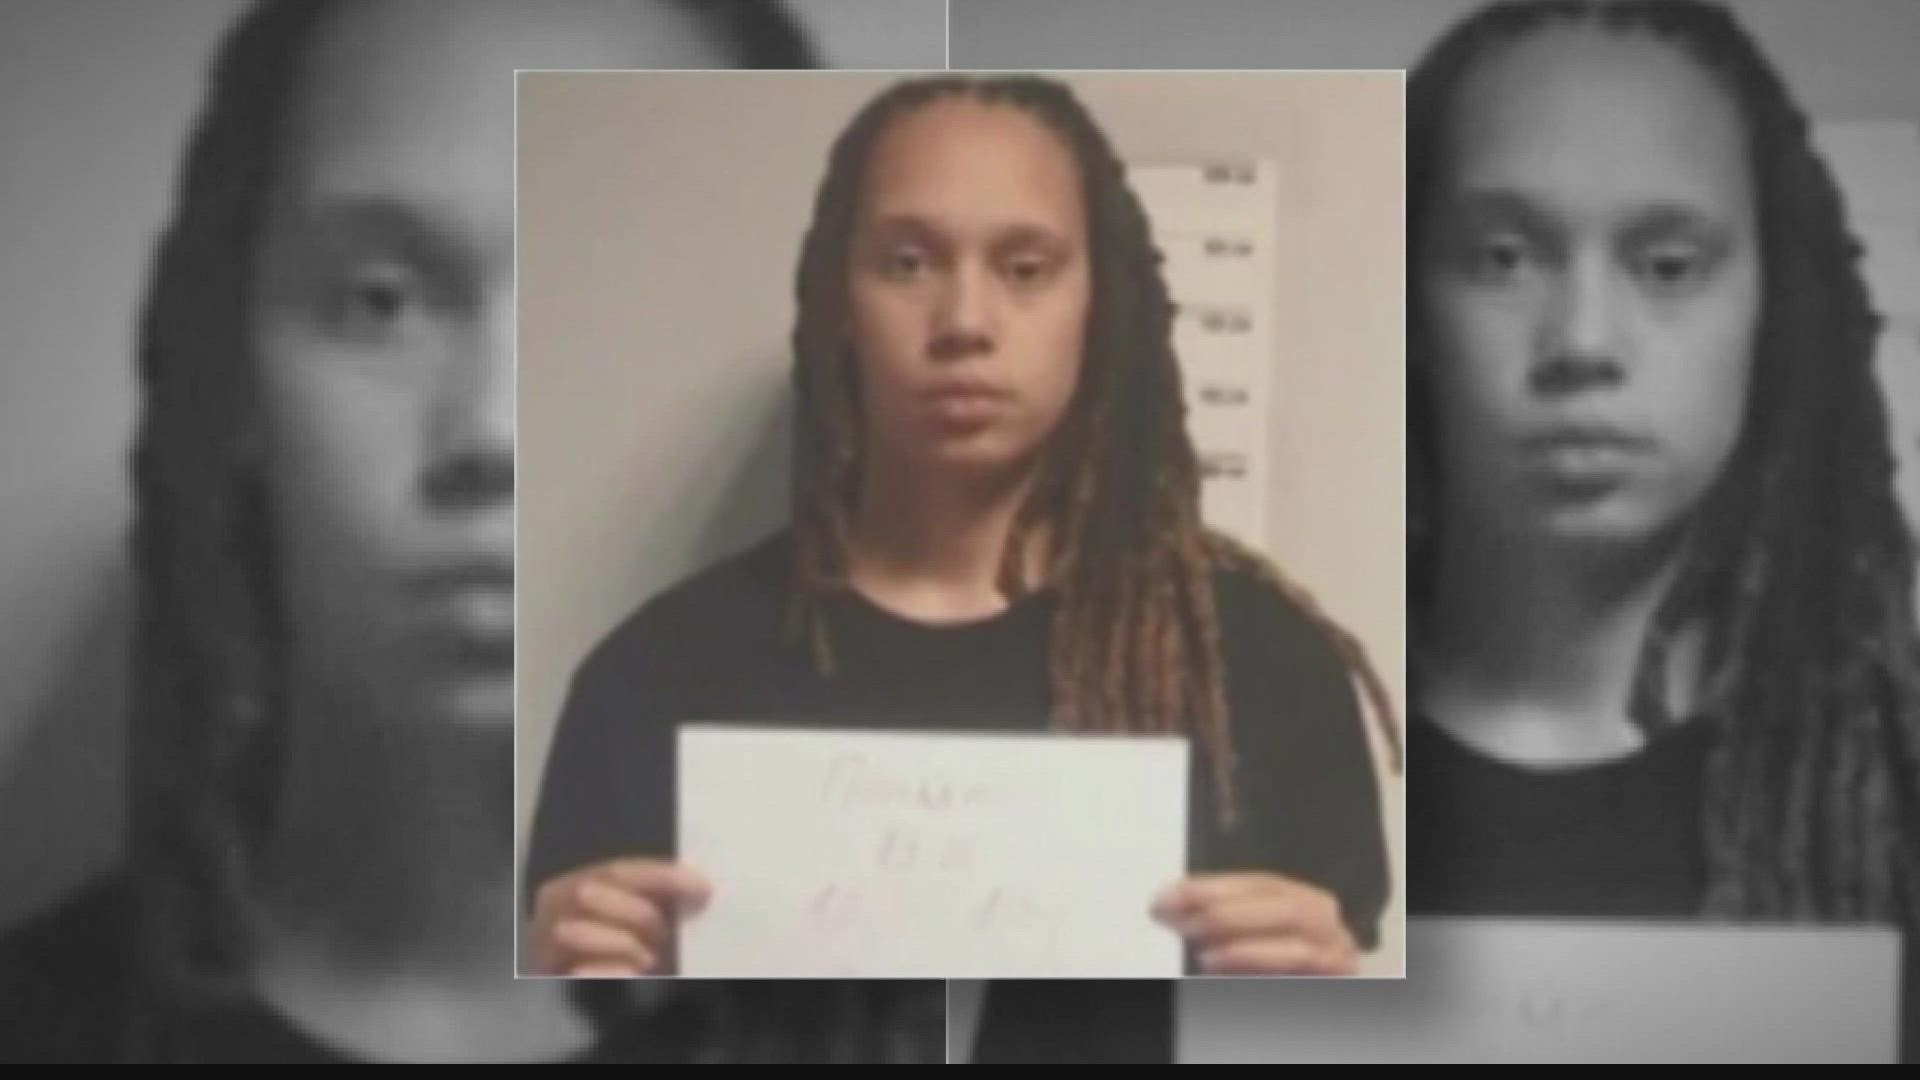 The Phoenix Mercury's Brittney Griner has been detained in Russia since February. She's now, officially, being wrongfully detained according to the U.S. State Dept.